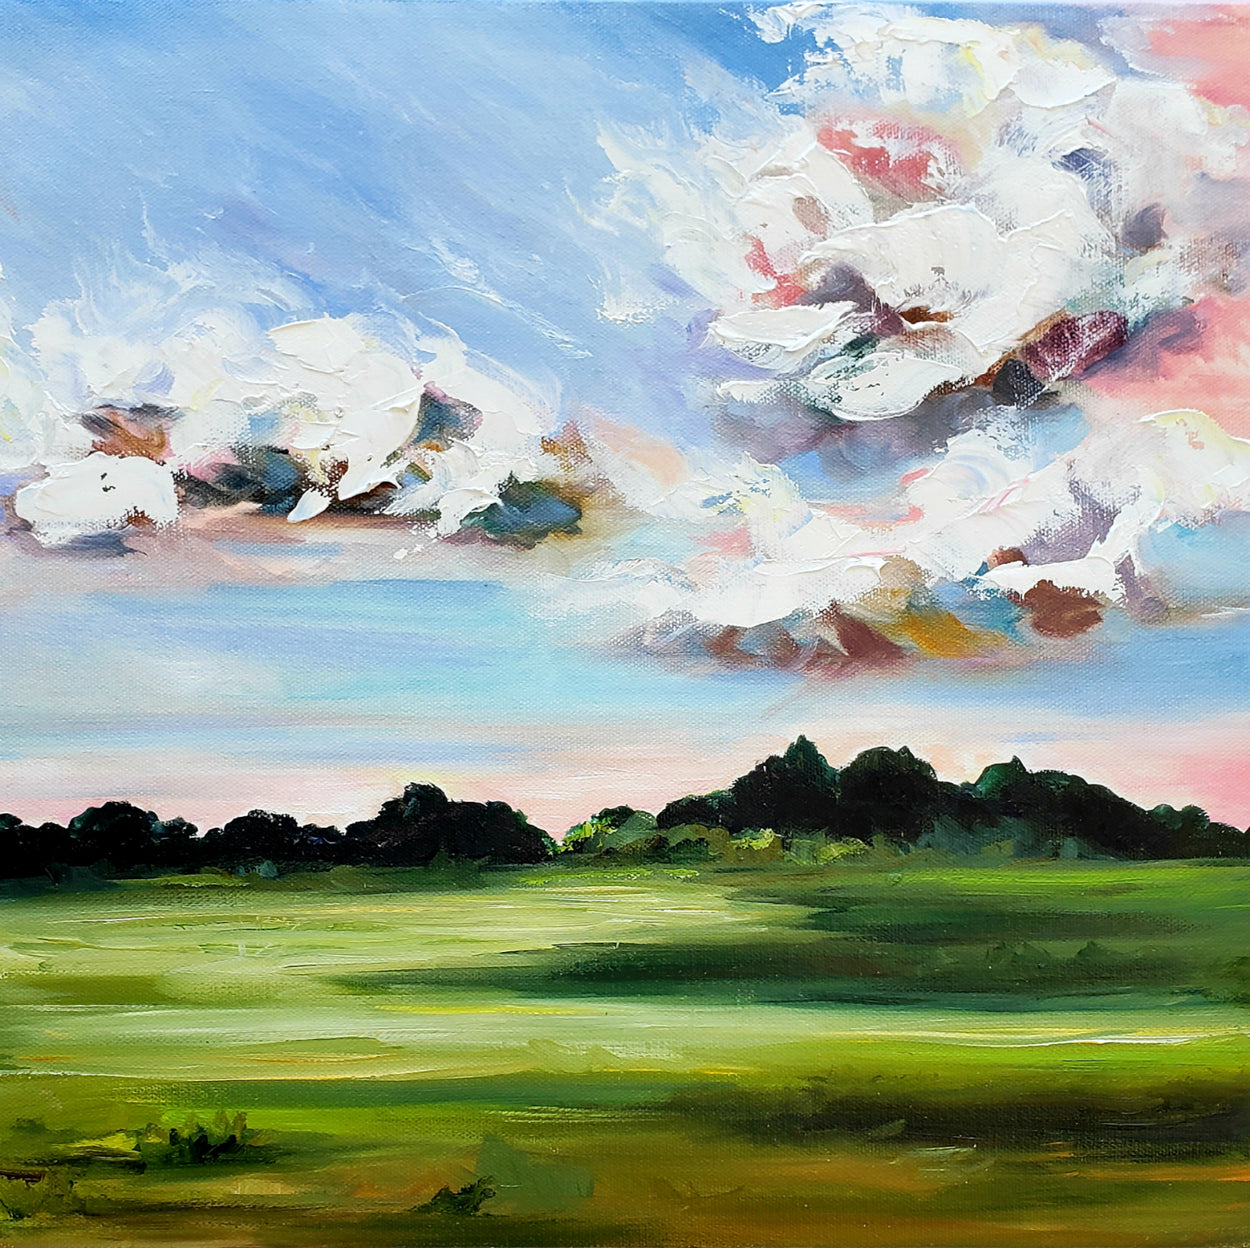 Cloudscape  blue sky puffy clouds pink and peach highlights beautiful green meadow. Original oil painting on canvas 16 x 16 inches